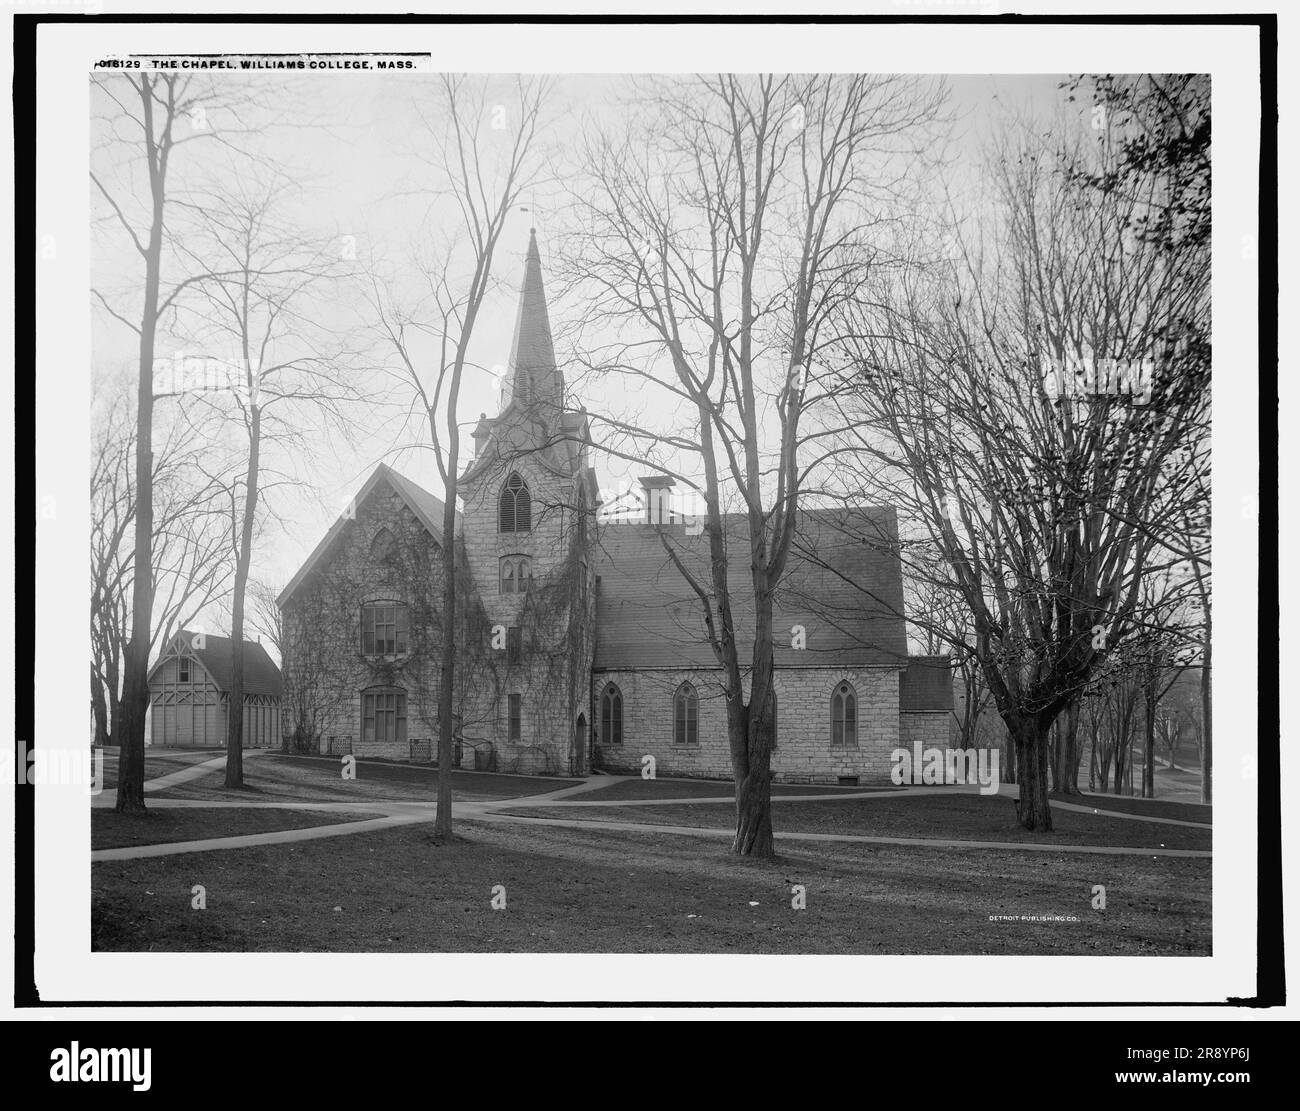 The Chapel, Williams College, Mass., between 1900 and 1906. Stock Photo